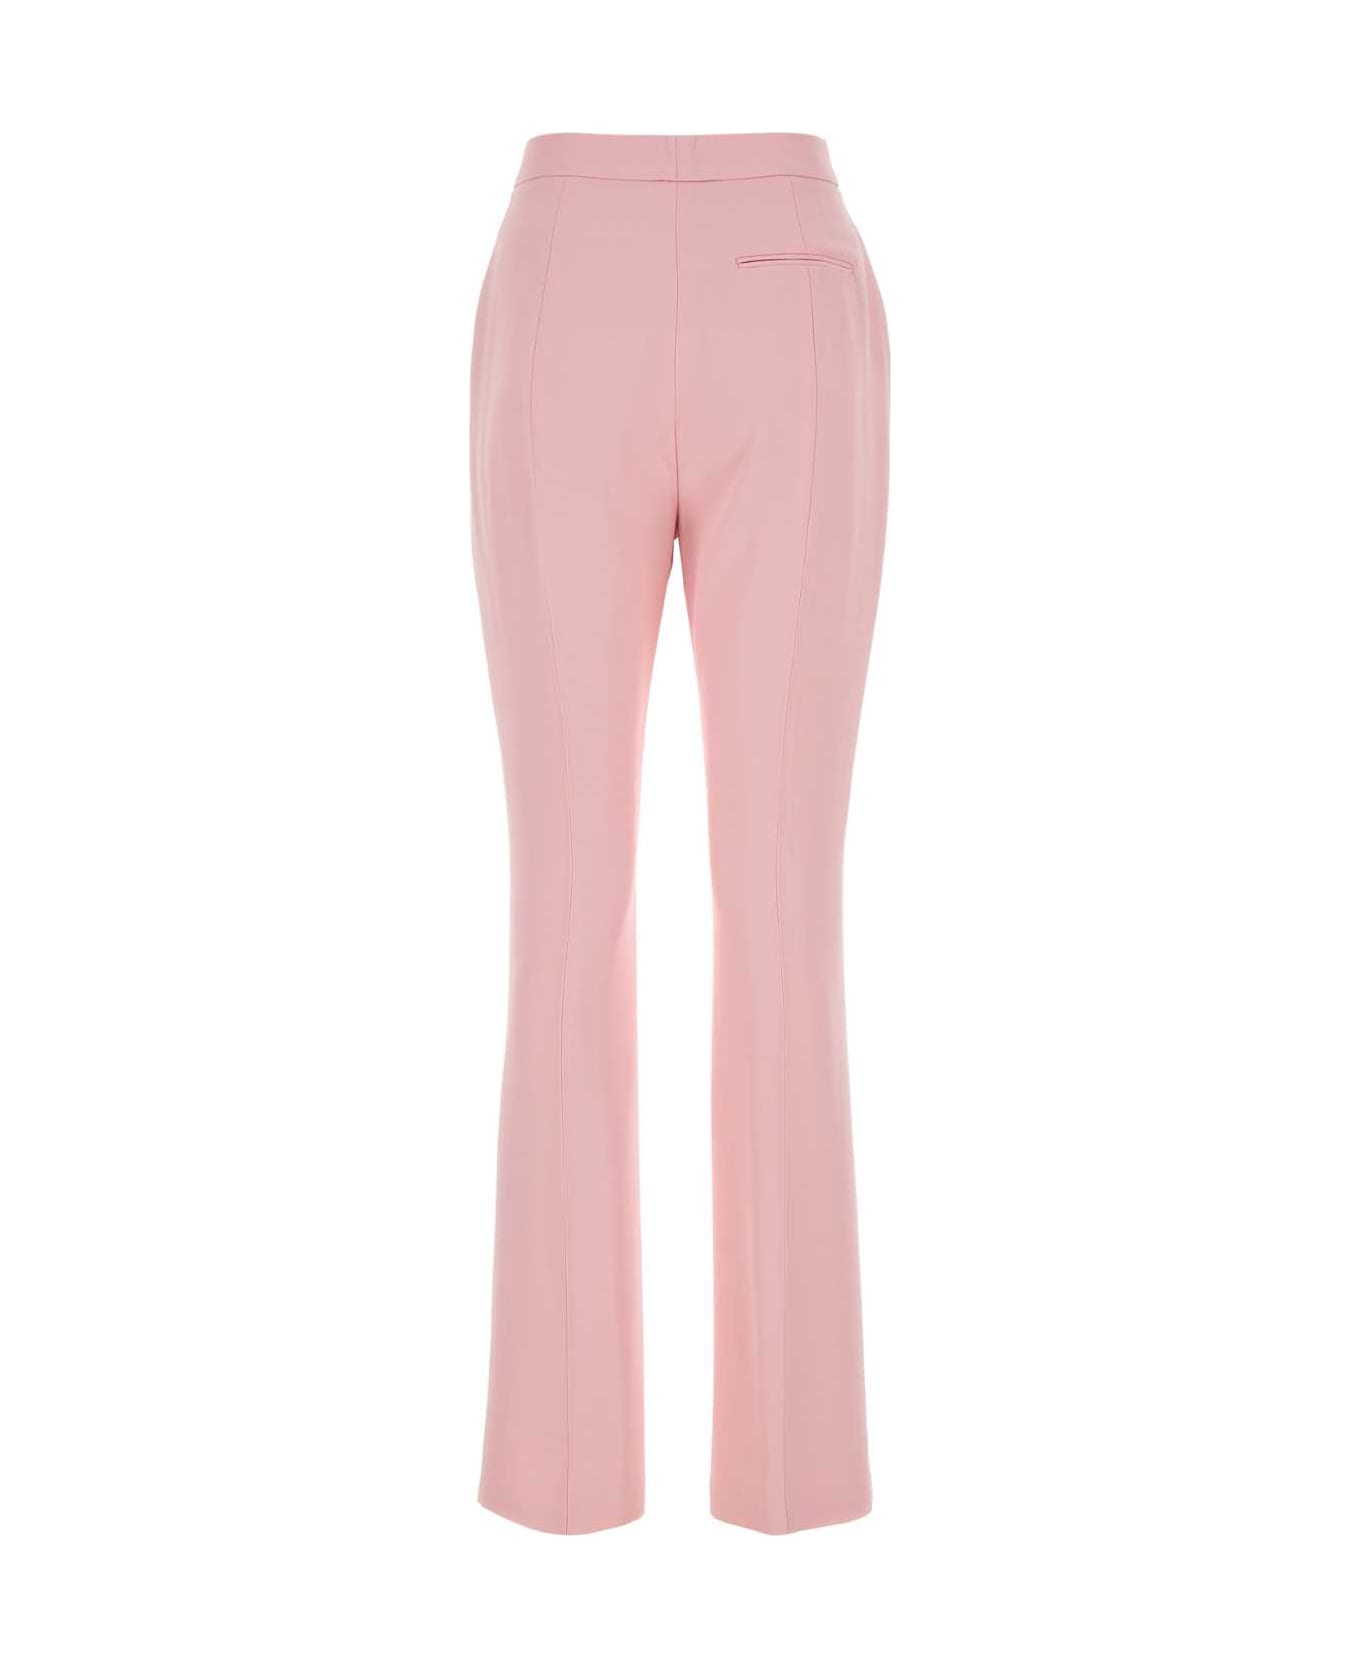 Alexander McQueen Pink Crepe Cigarette Pant - PALEPINK ボトムス